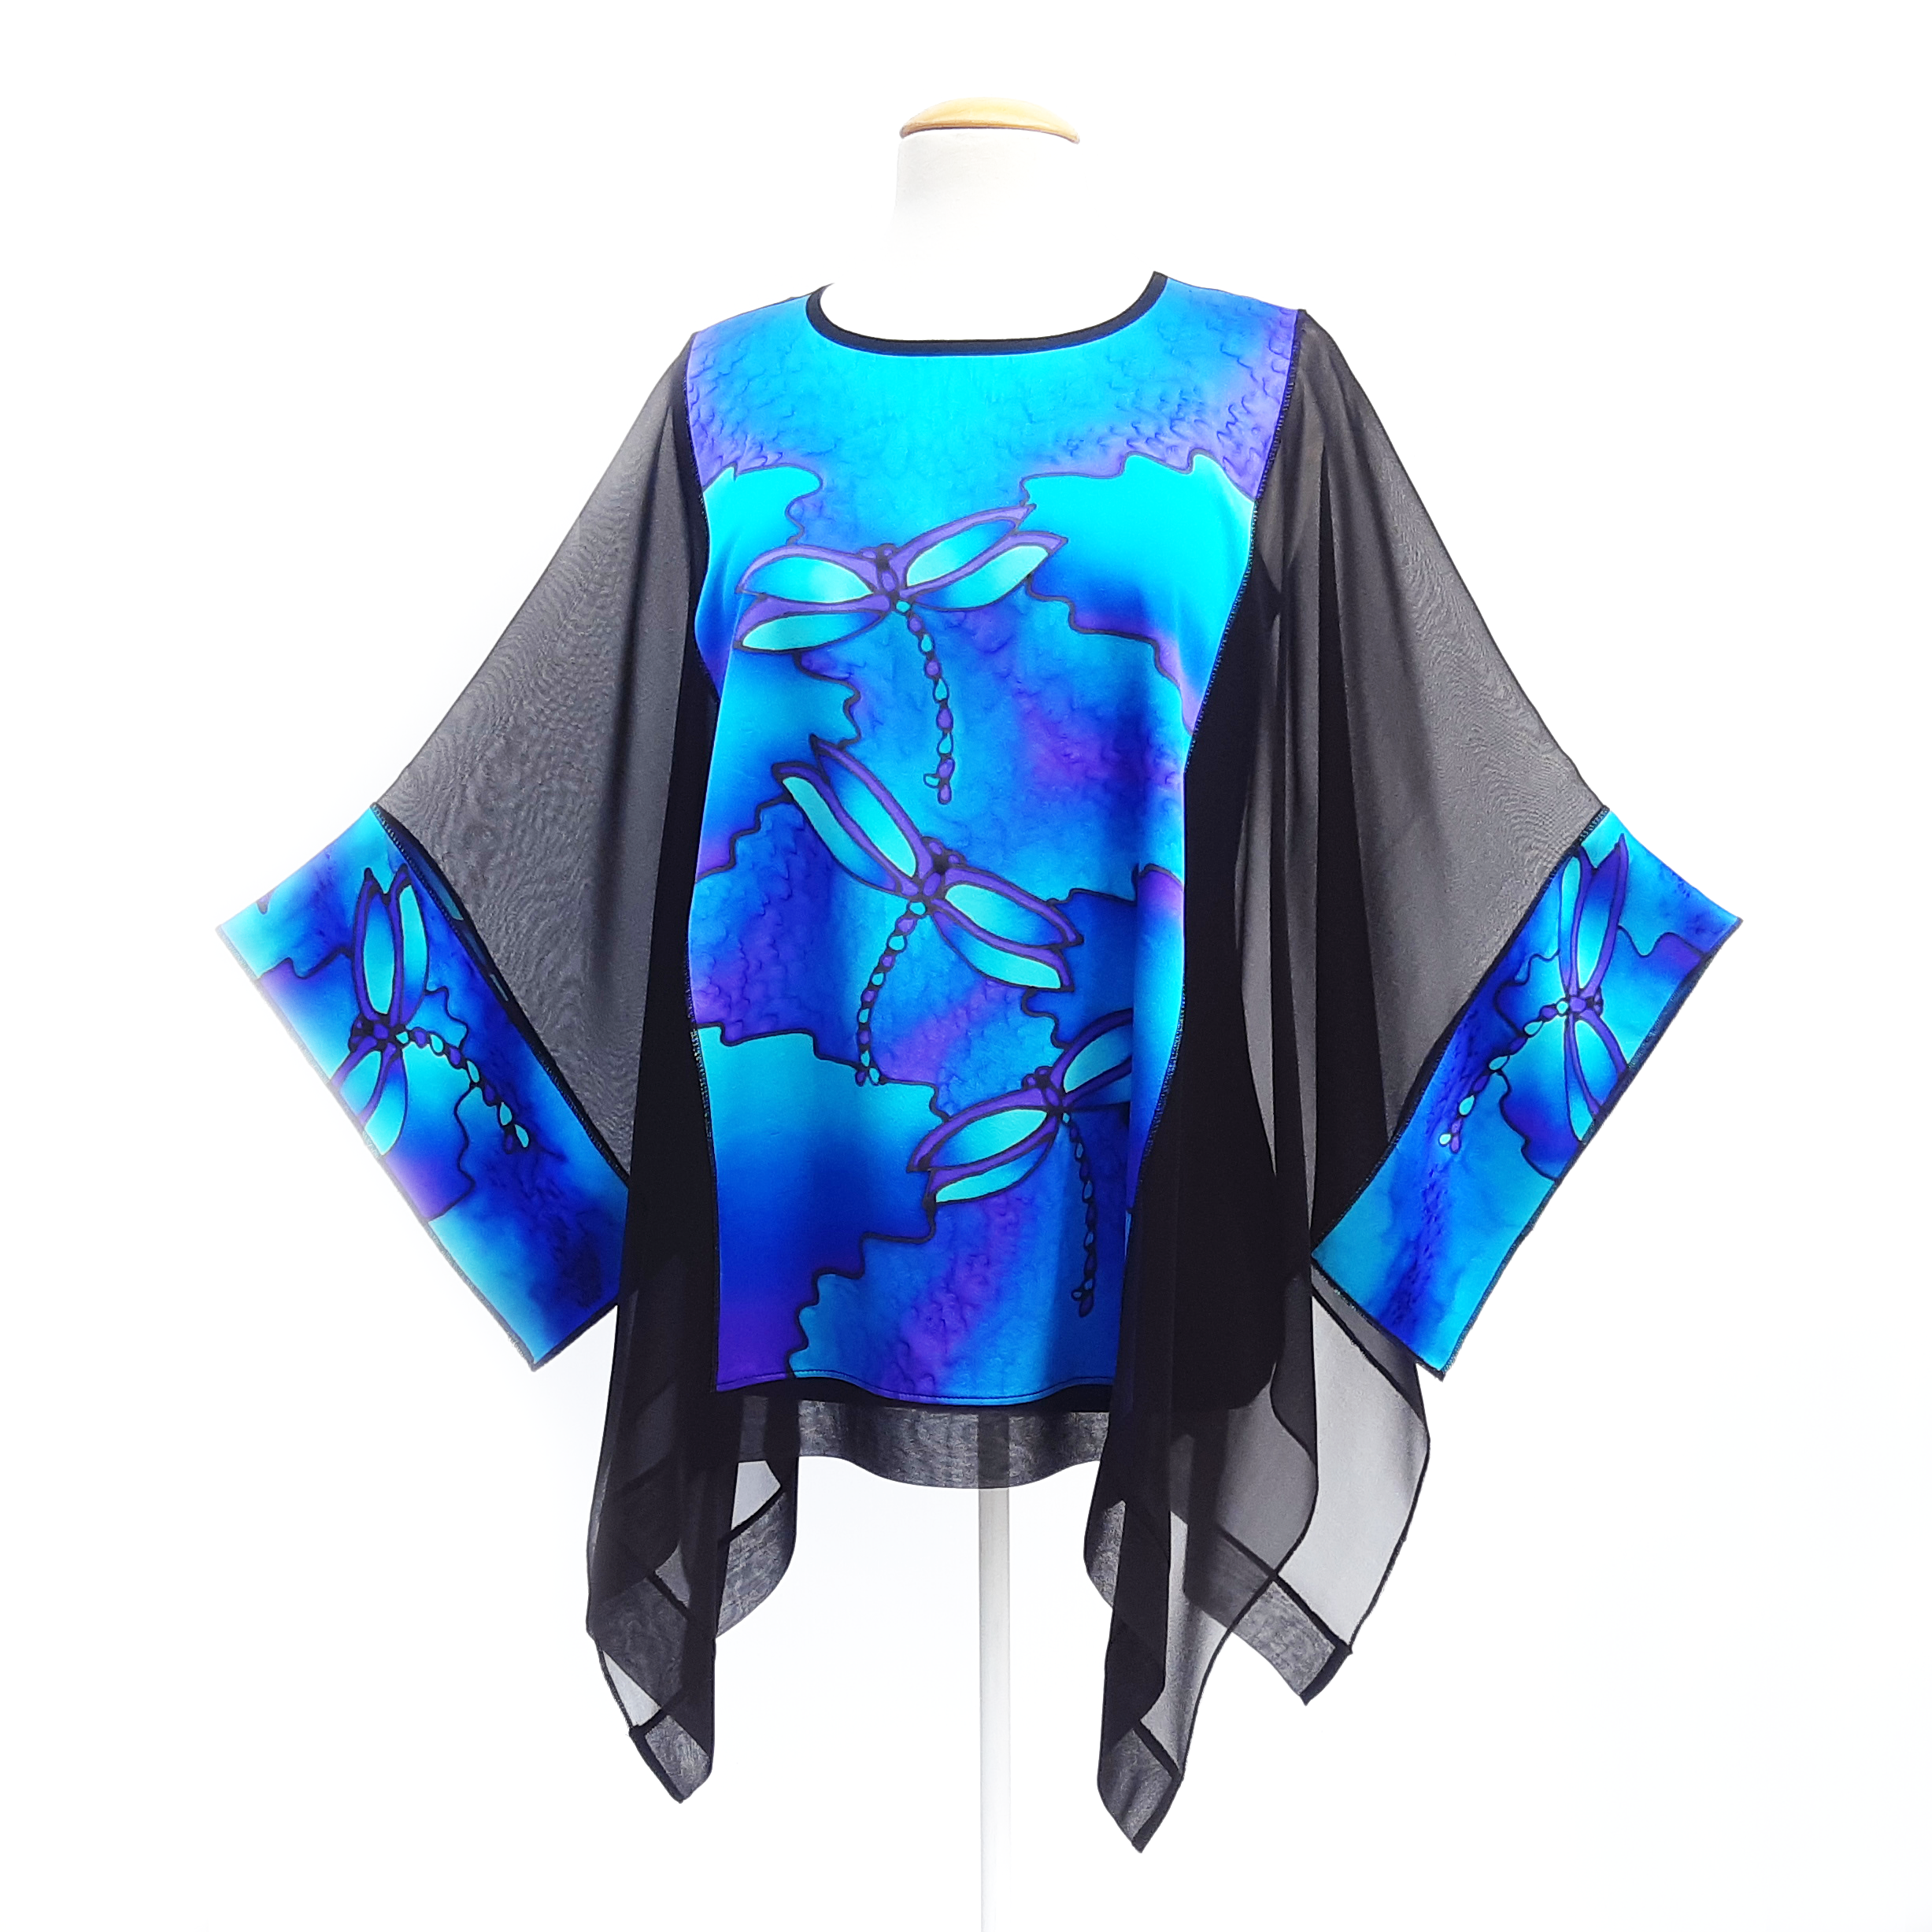 hand painted silk dragonfly caftan top one size blue and black color handmade in canada by Lynne Kiel